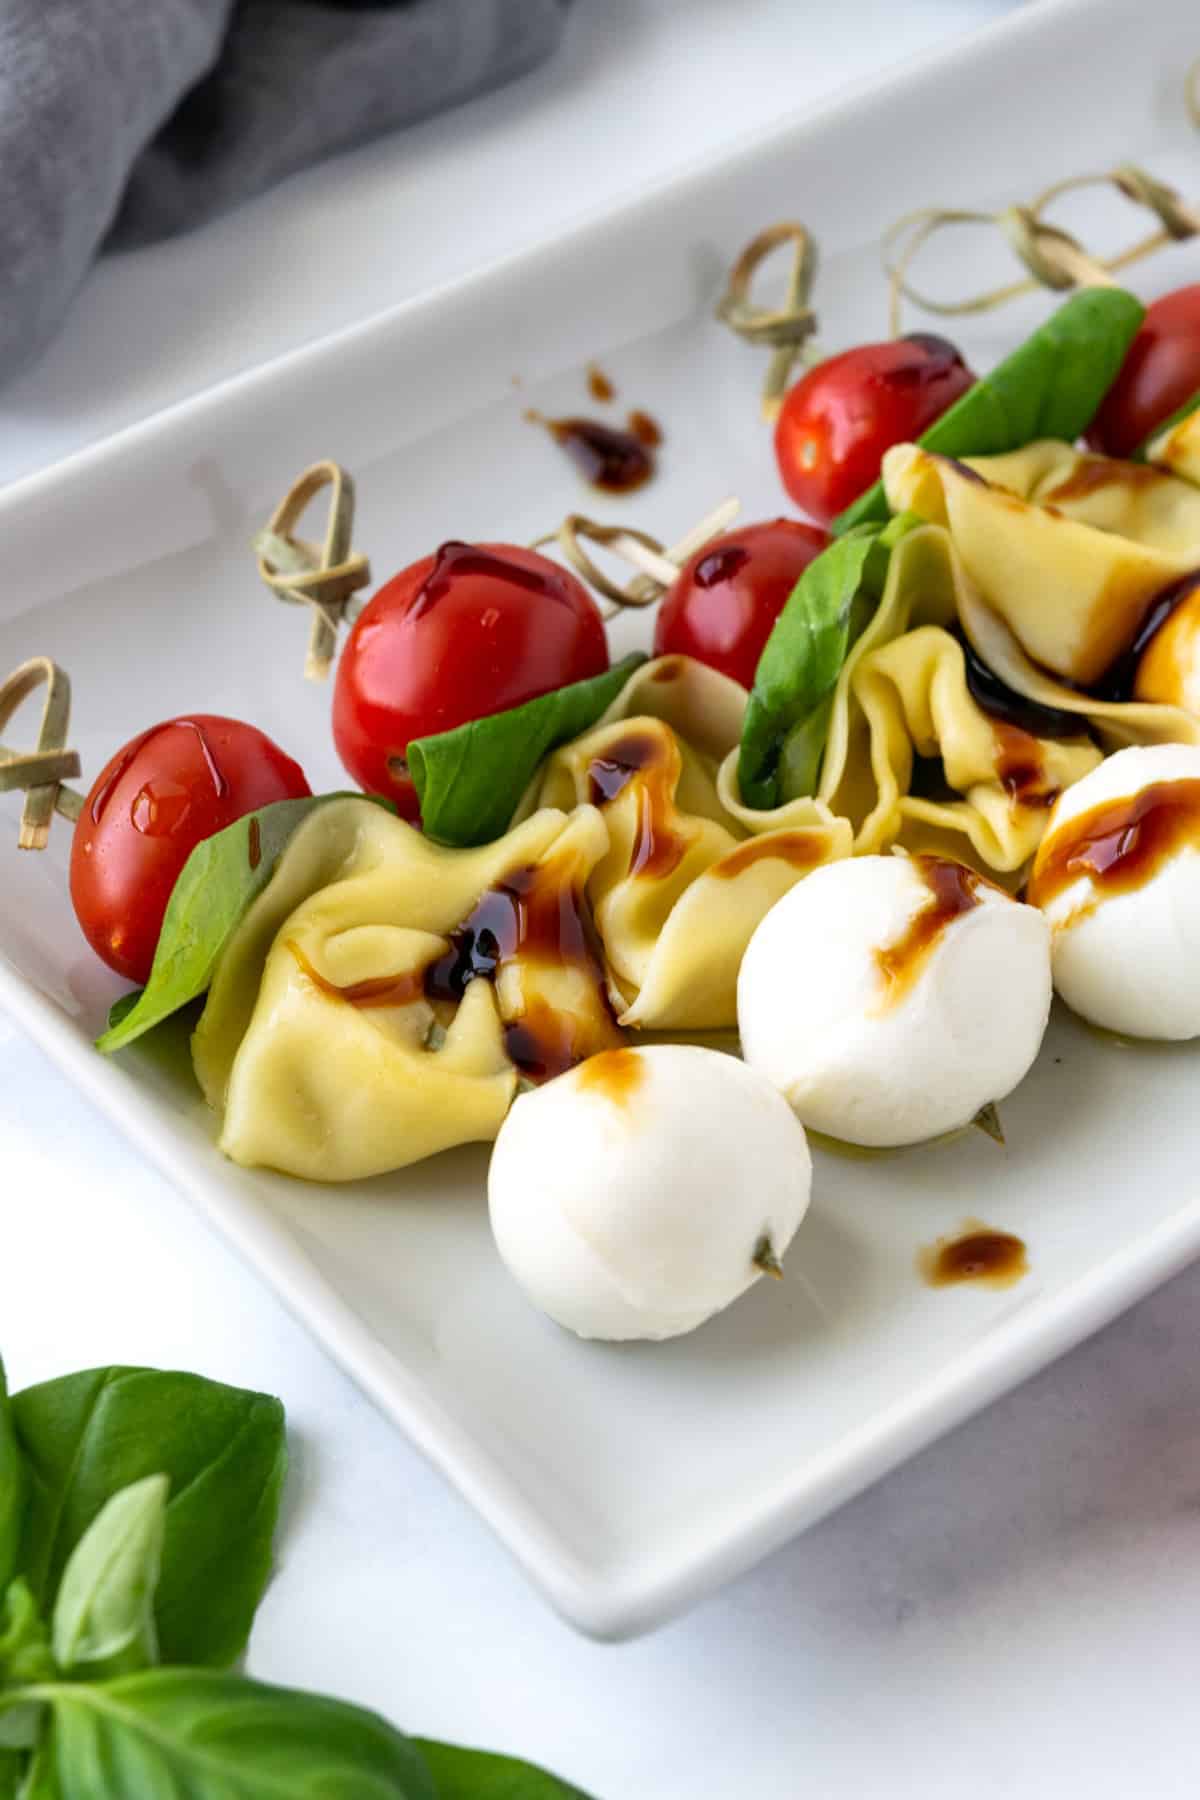 Tomatoes, basil, tortellini, and mozzarella balls on wooden skewers on a serving plate.